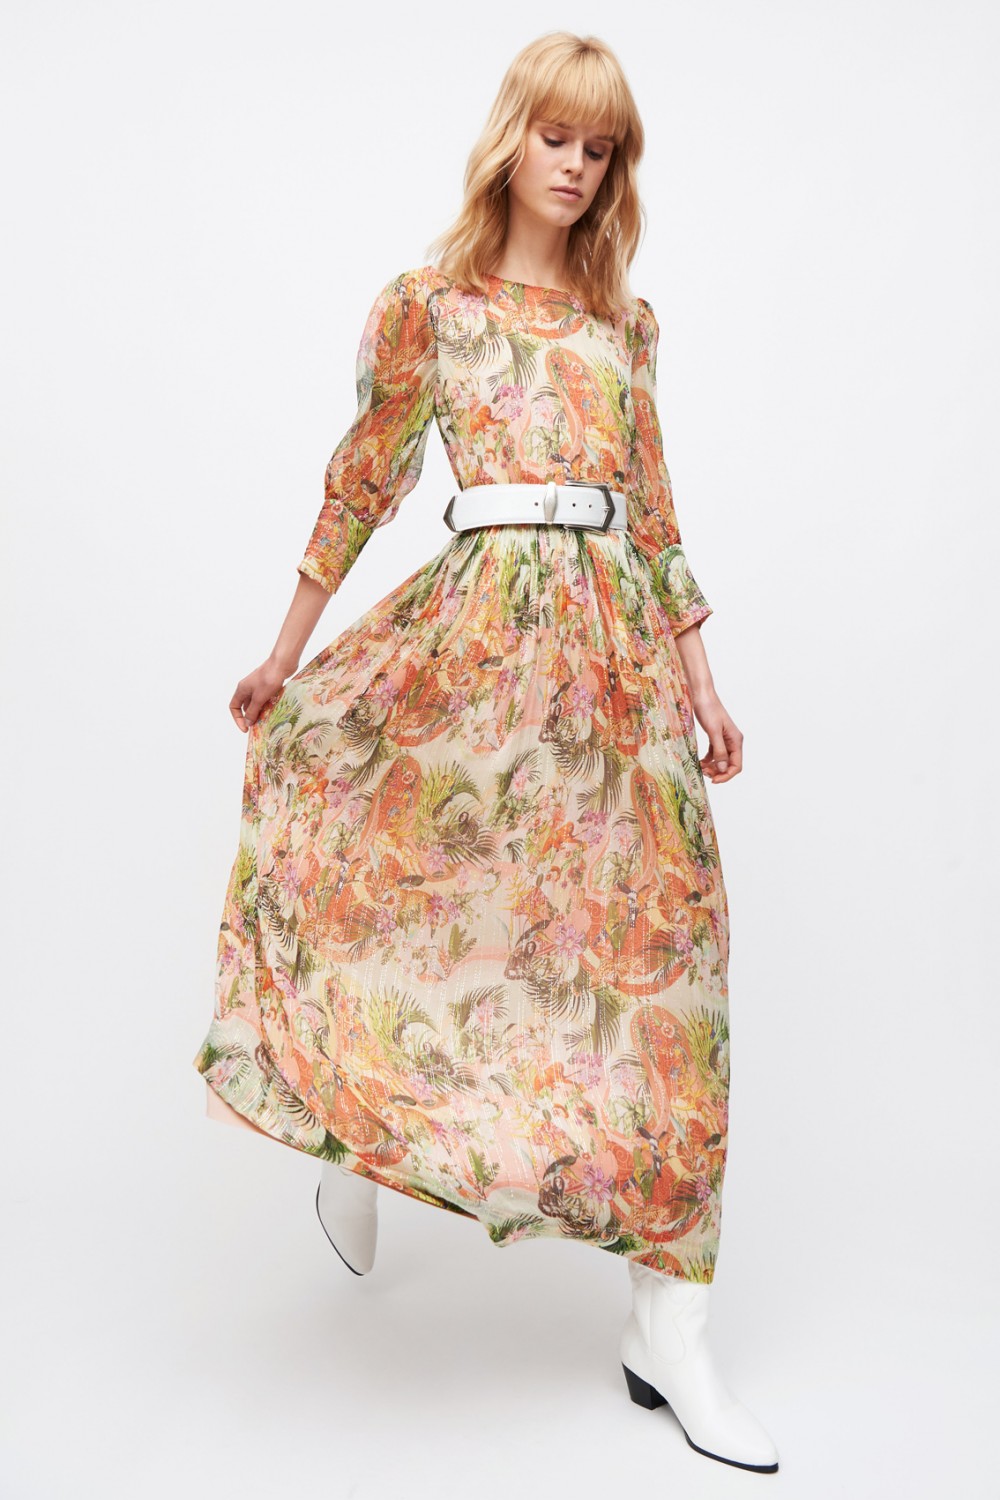 Flower dress with sleeves